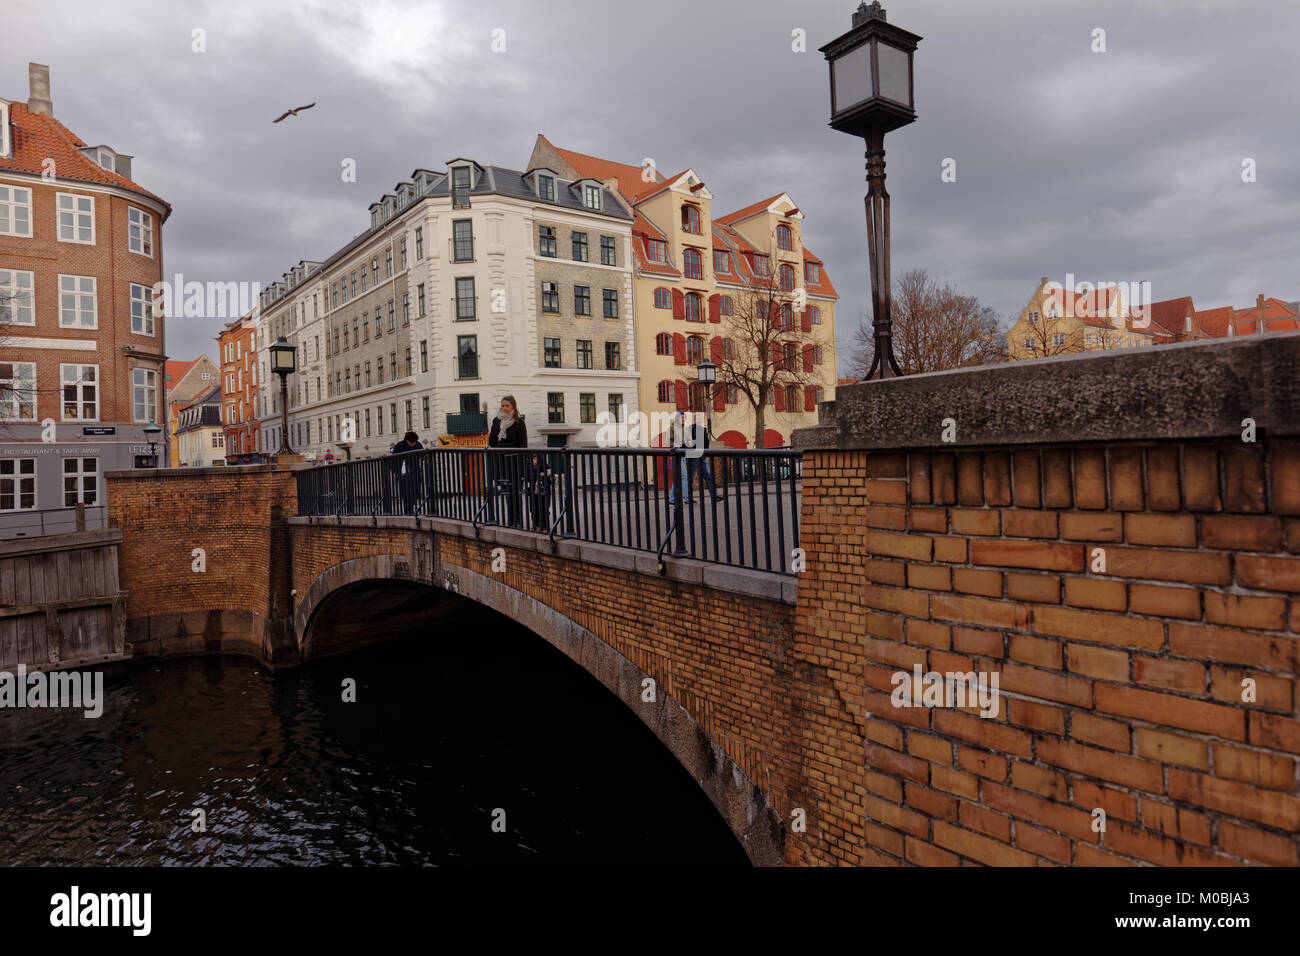 Copenhagen, Denmark - November 07, 2016: People walking on Snorrebro bridge across Chrisianshavn canal. The canal is noted for its bustling sailing co Stock Photo